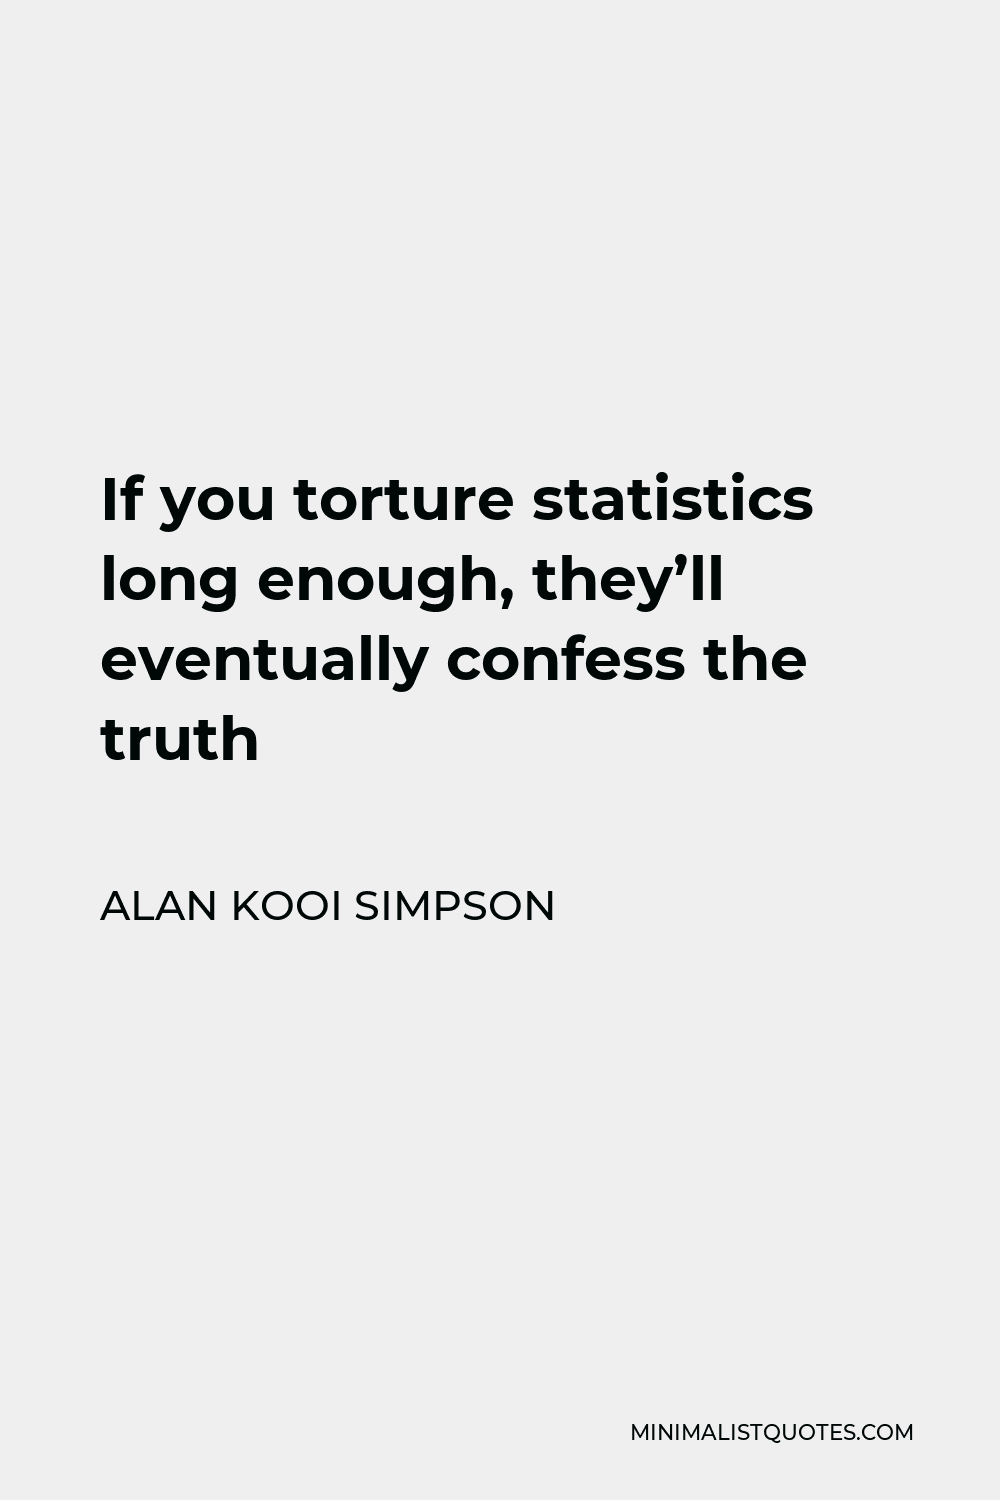 Alan Kooi Simpson Quote - If you torture statistics long enough, they’ll eventually confess the truth